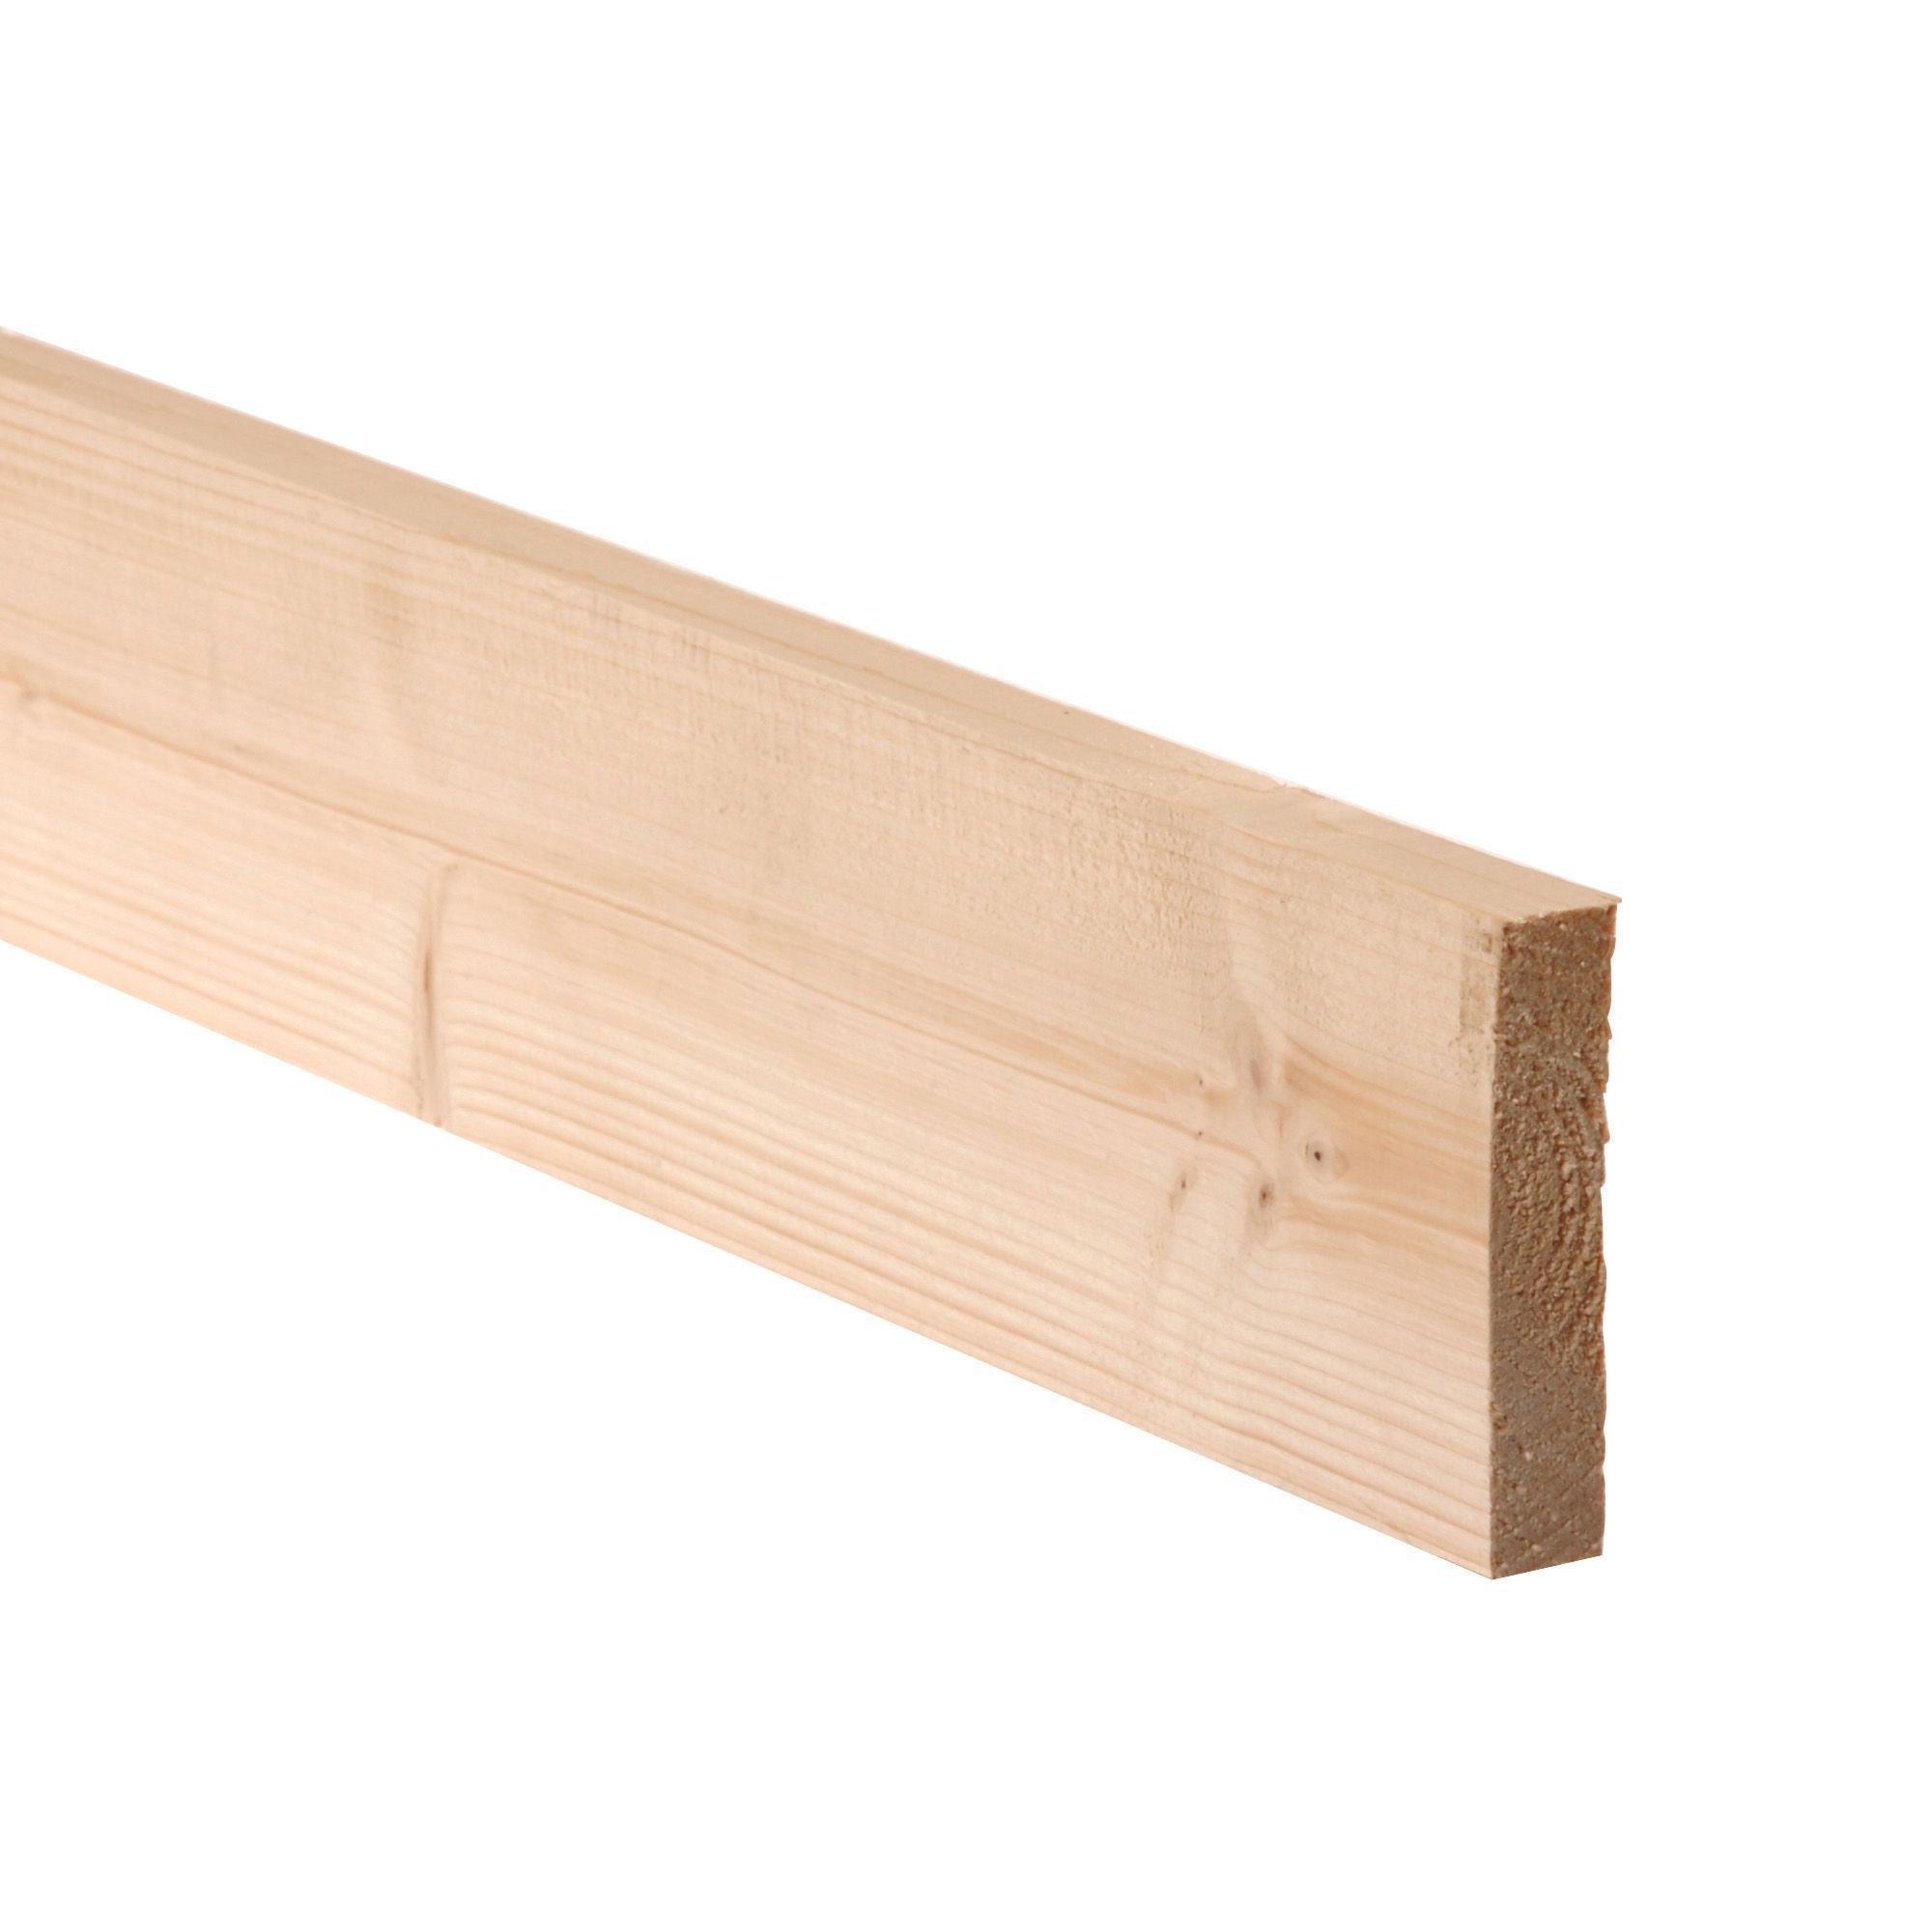 Smooth Planed Square edge Spruce Timber (L)2.4m (W)94mm (T)18mm 253242, Pack of 8